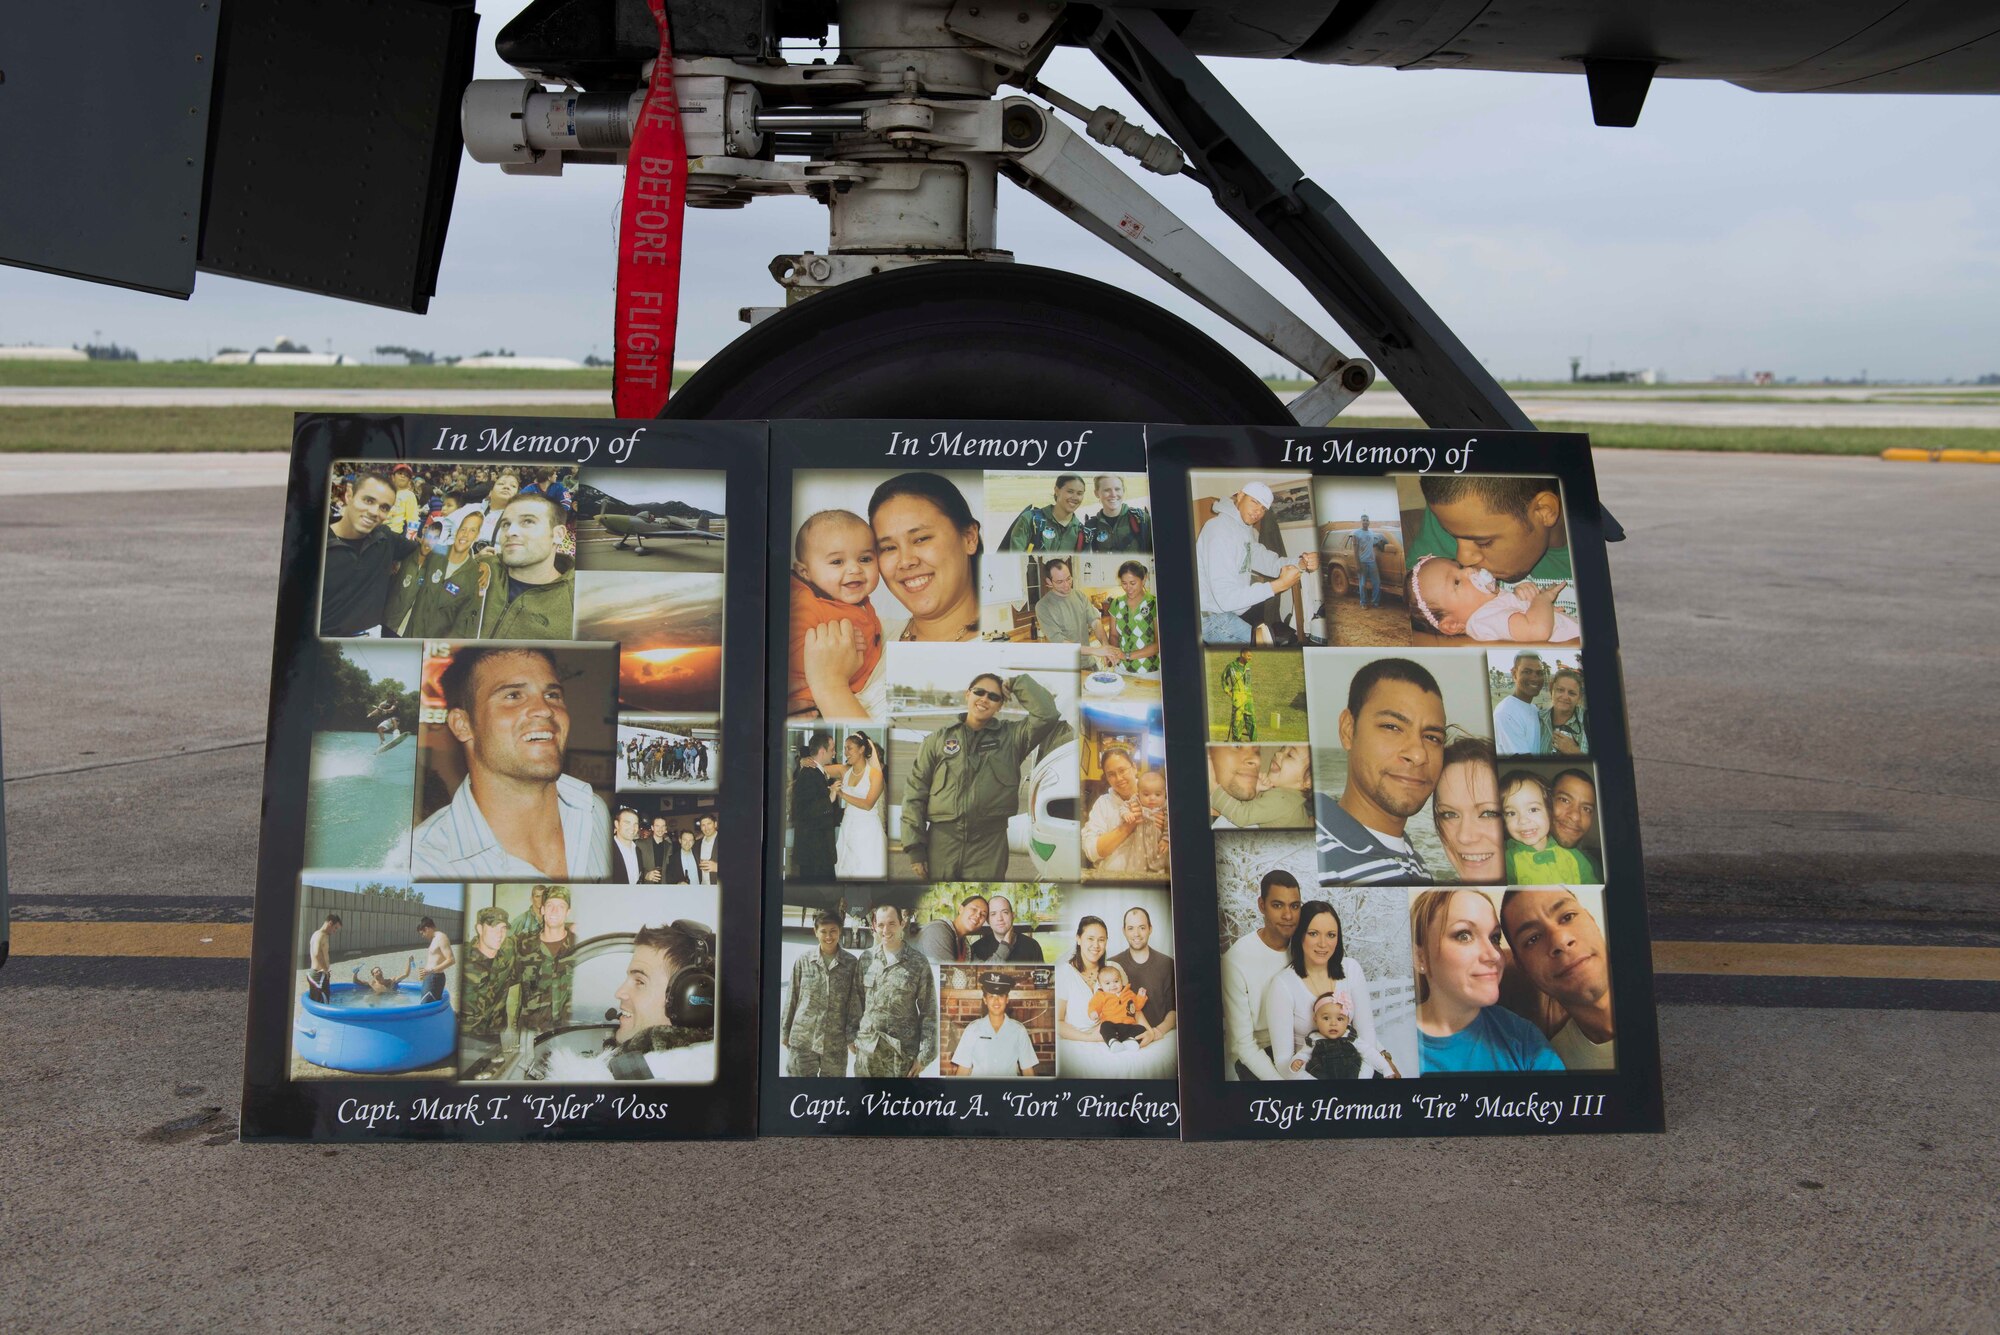 Photo collages of Capt. Mark Voss, Capt. Victoria Pinckney and Technical Sgt. Herman Mackey III, sit on display against the landing gear of a KC-135 Stratotanker during a memorial ceremony honoring the fallen crew members May 3, 2017, at Incirlik Air Base. Voss, Pinckney and Mackey were deployed to the 376th Air Expeditionary Wing’s 22nd Expeditionary Air Refueling Squadron in support of Operation Enduring Freedom when their KC-135 Stratotanker, callsign Shell 77, crashed in Northern Kyrgyzstan. (U.S. Air Force photo by Airman 1st Class Devin M. Rumbaugh)